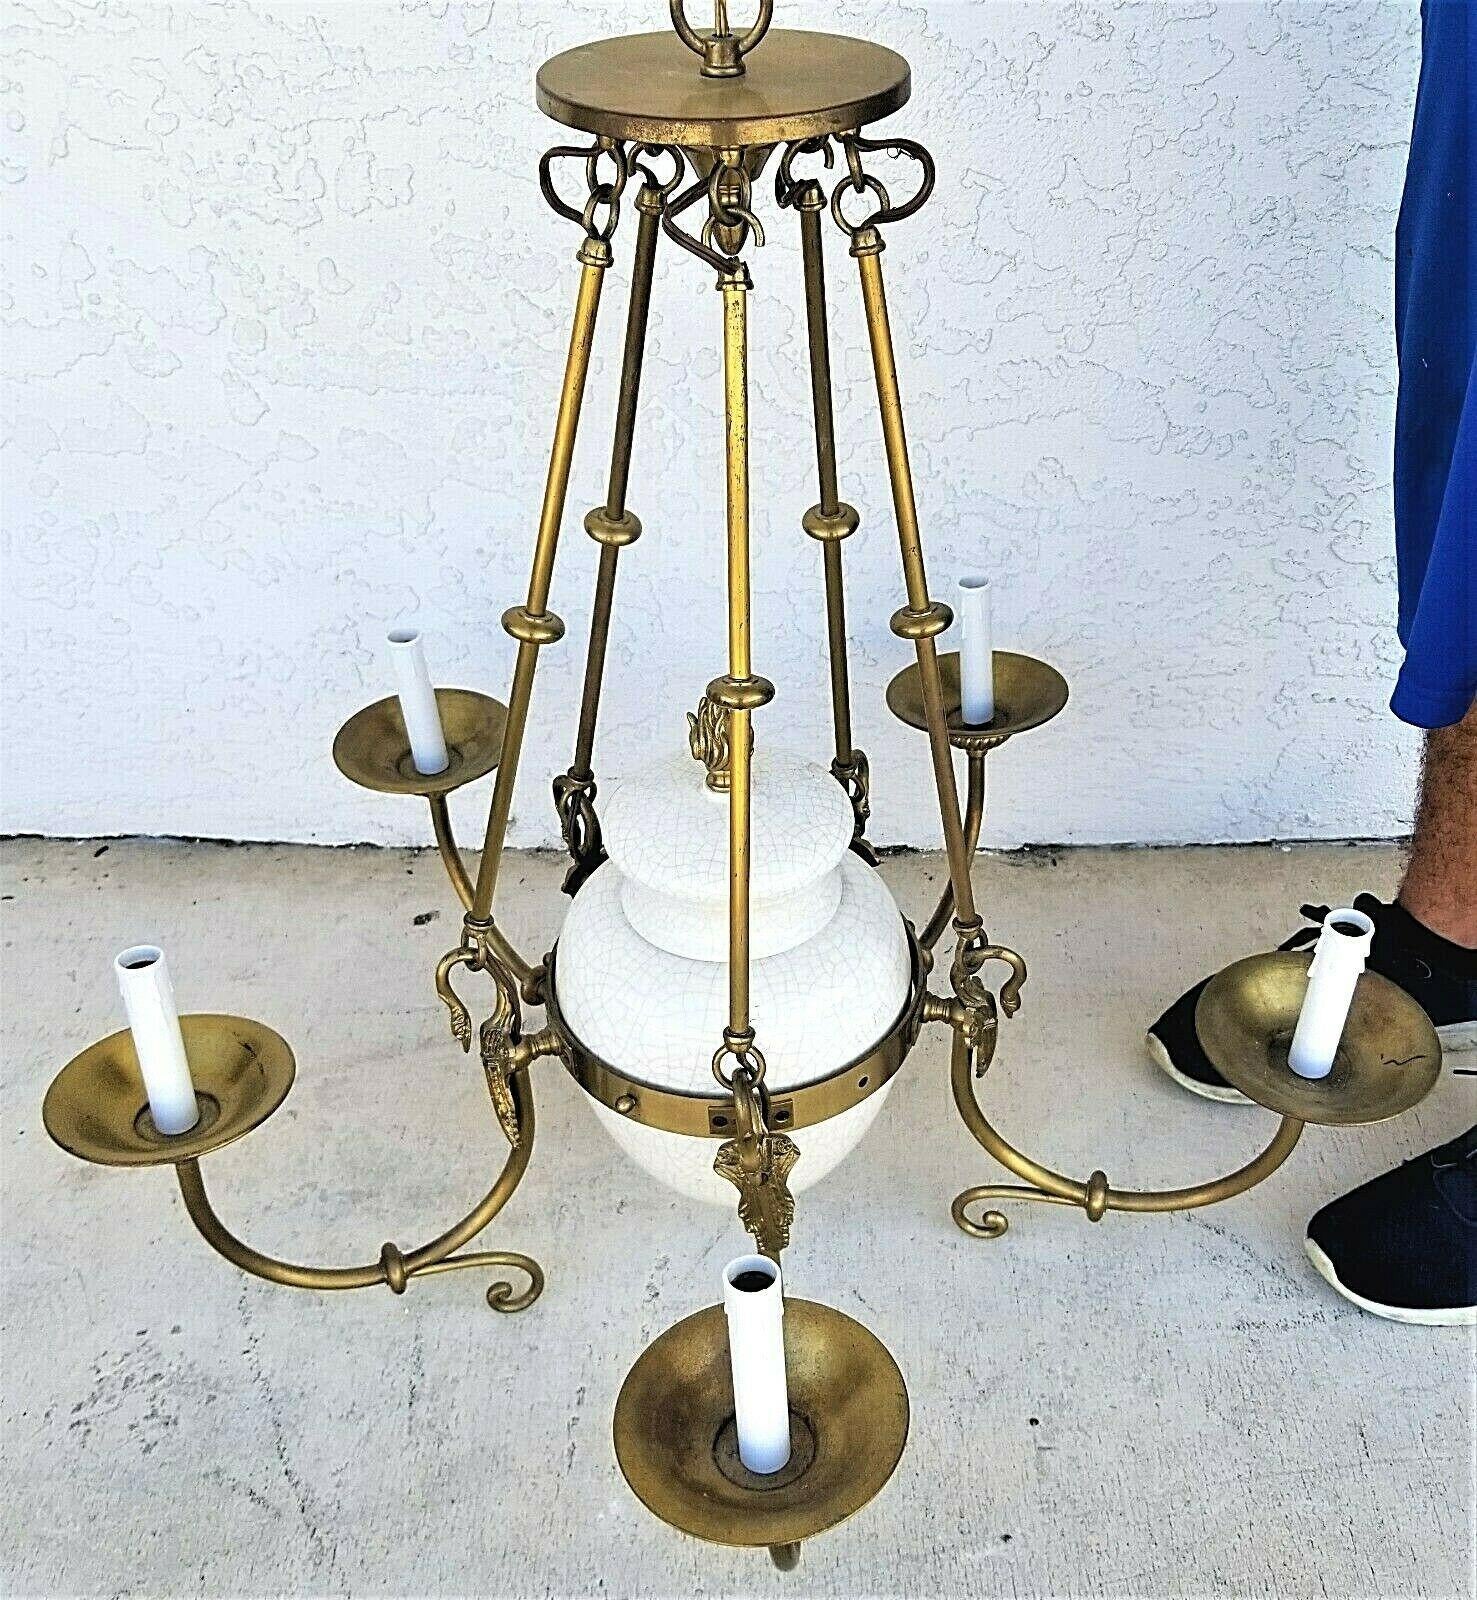 Mid-20th Century Vintage French Empire Brass Swans & Porcelain Chandelier 5 Light  For Sale